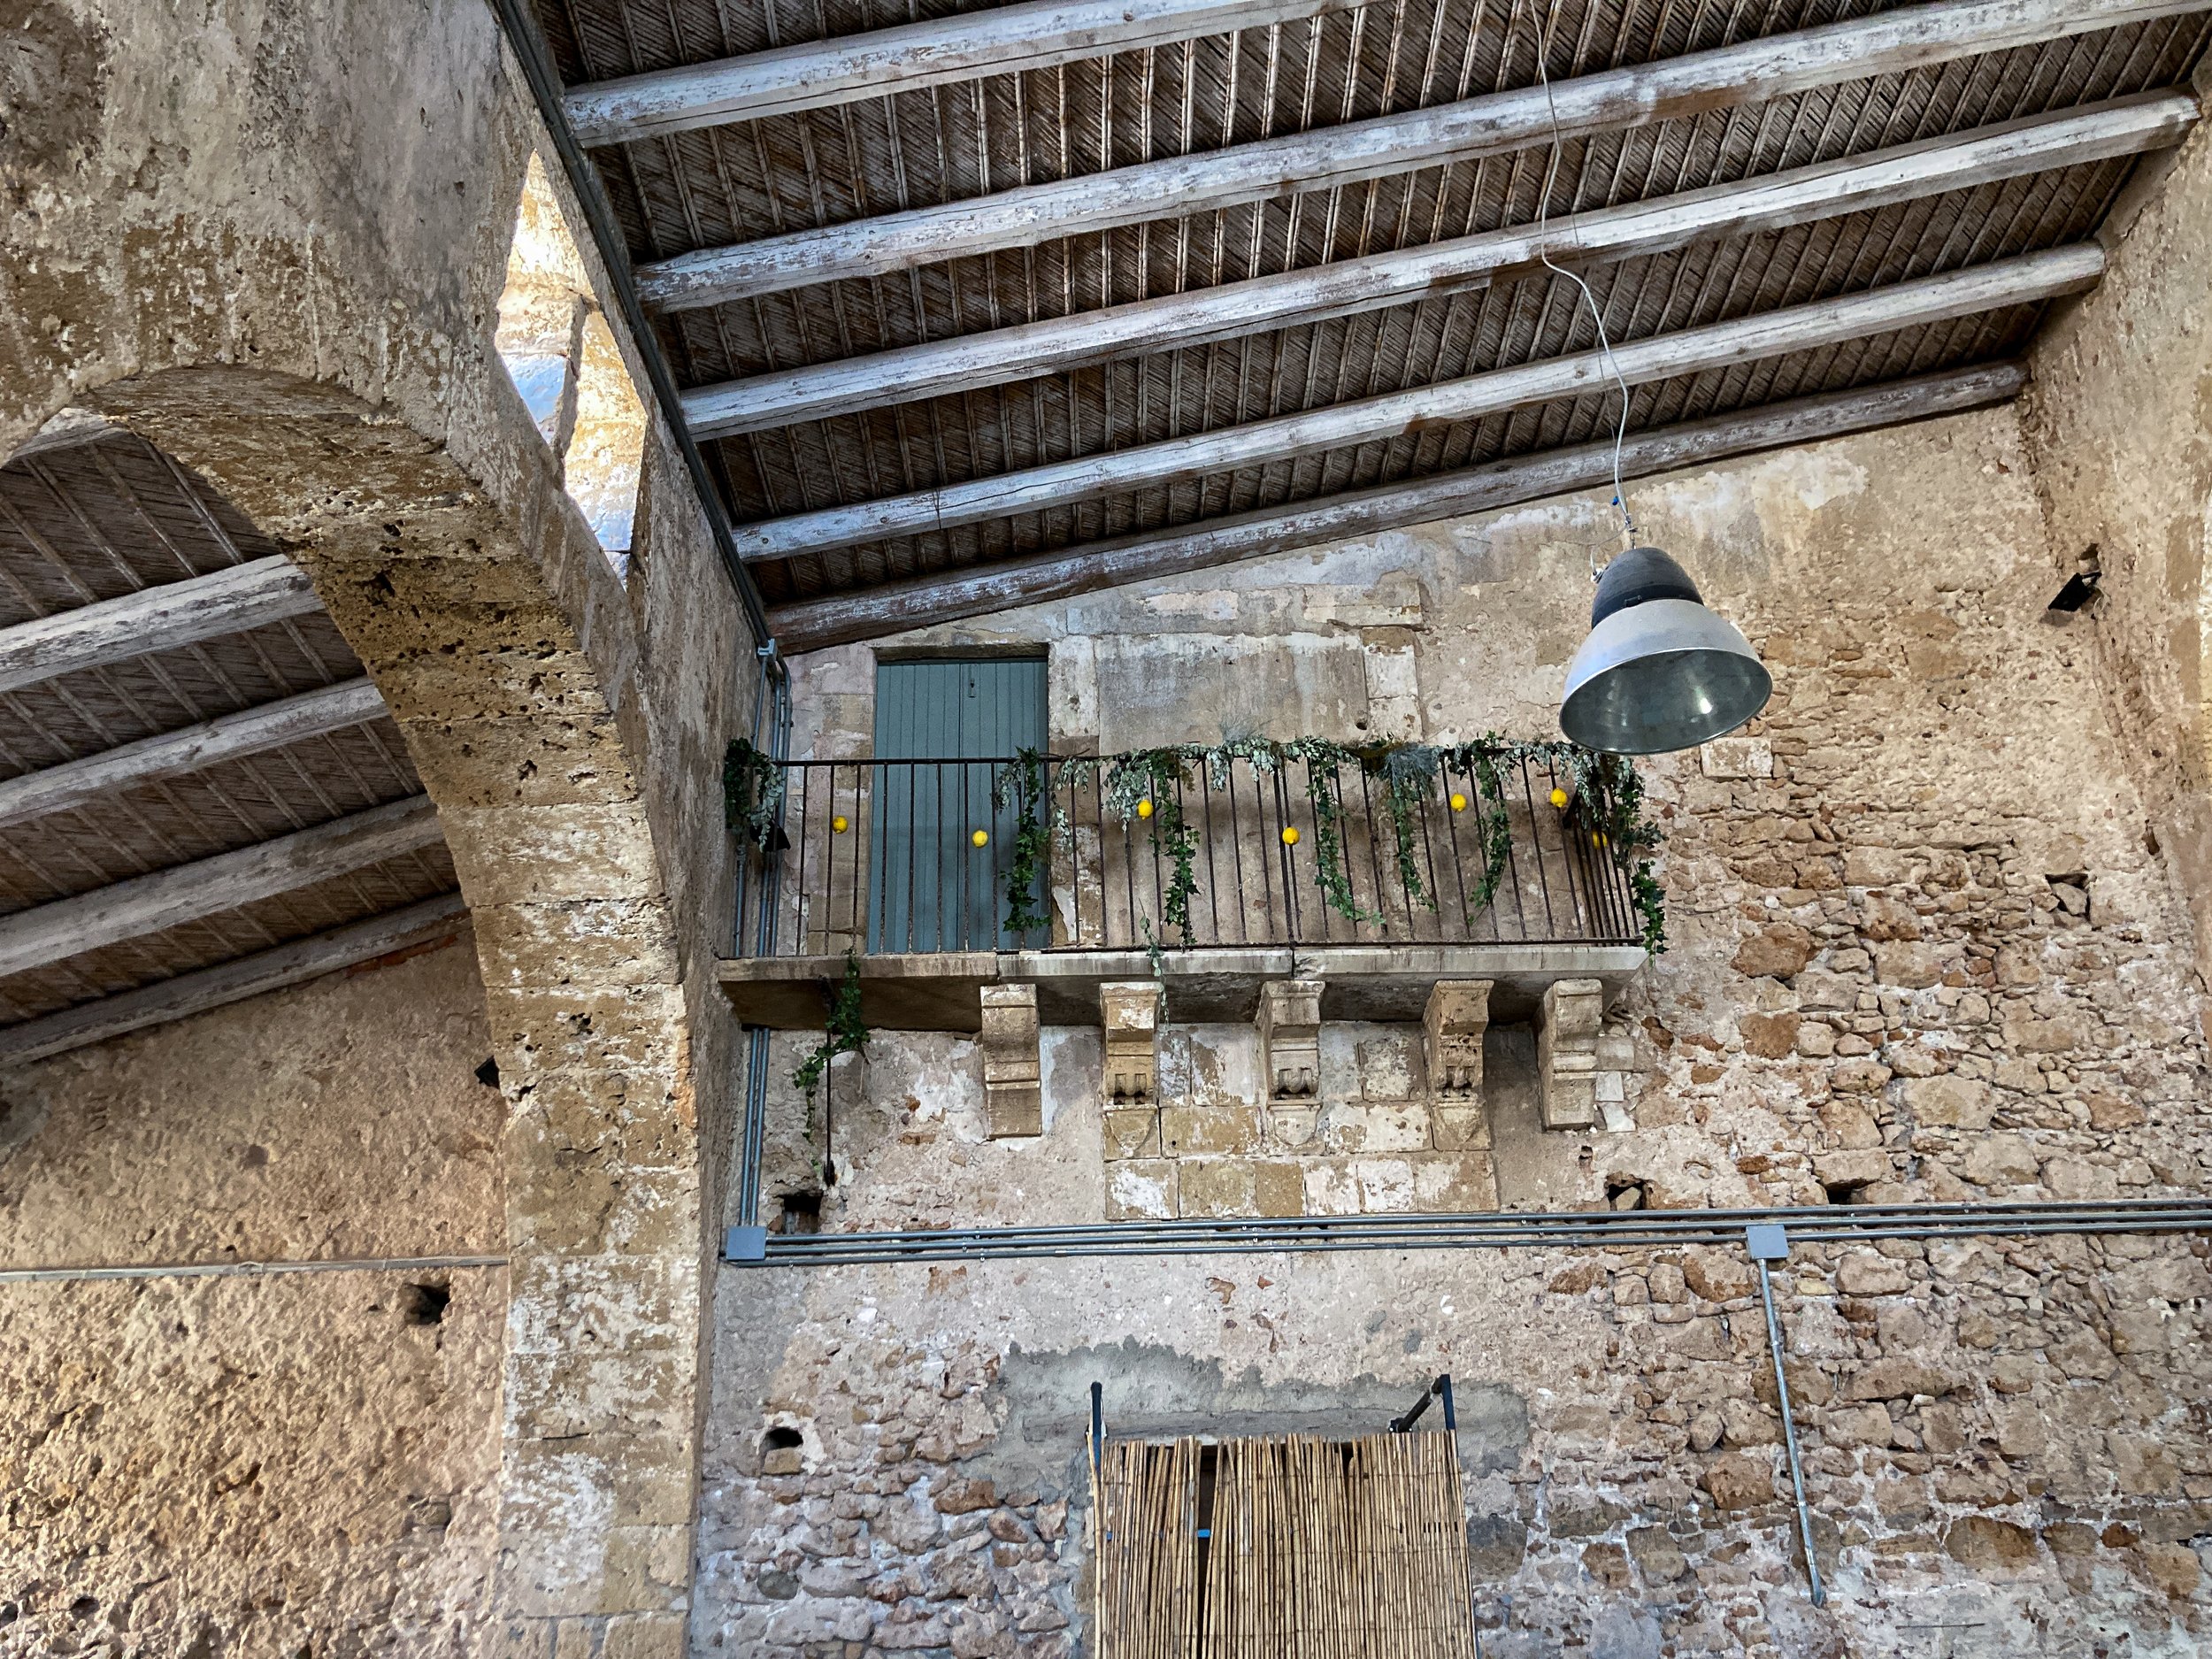  Figure 10. Prince Villadorata used this little balcony within the Loggia to periodically check on the workers’ progress. Photograph by G. Vaccarino Gearty, 2022. 